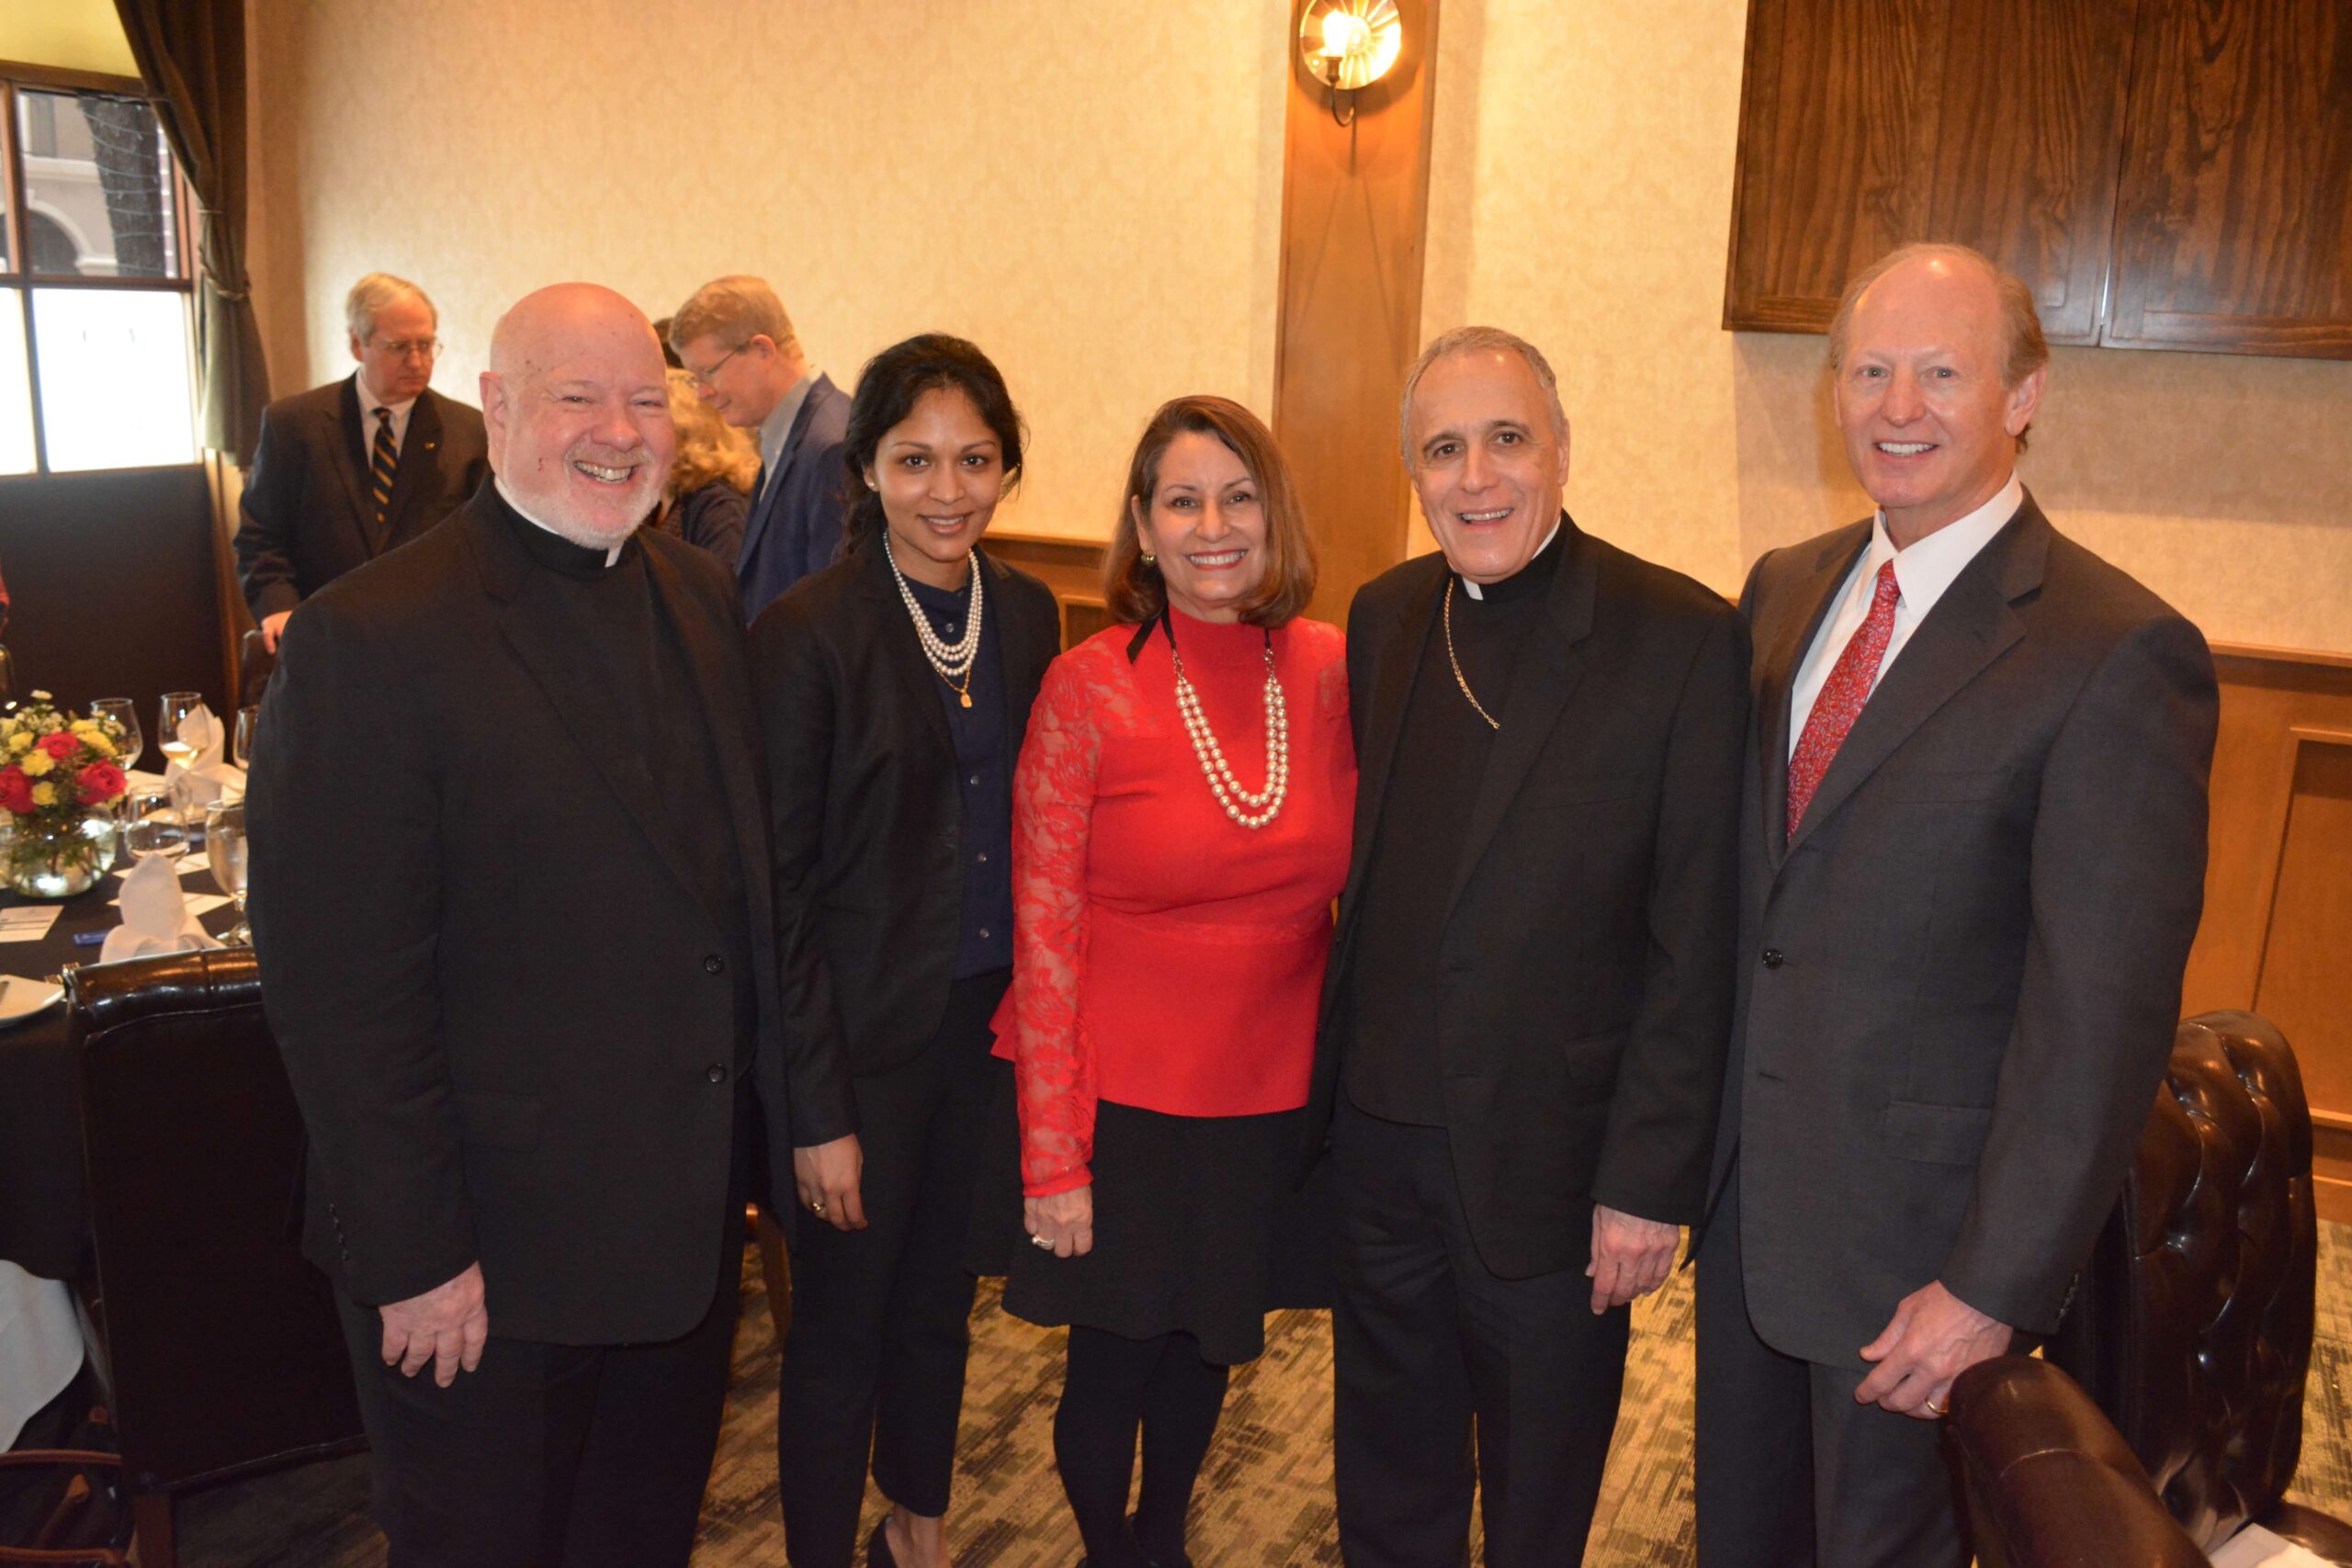 Monsignor Sullivan and Marion Boteju from Catholic Charities New York with His Eminence Daniel Cardinal DiNardo, Catholic Charities President Cynthia N Colbert and Board Chair Kevin K Rech.